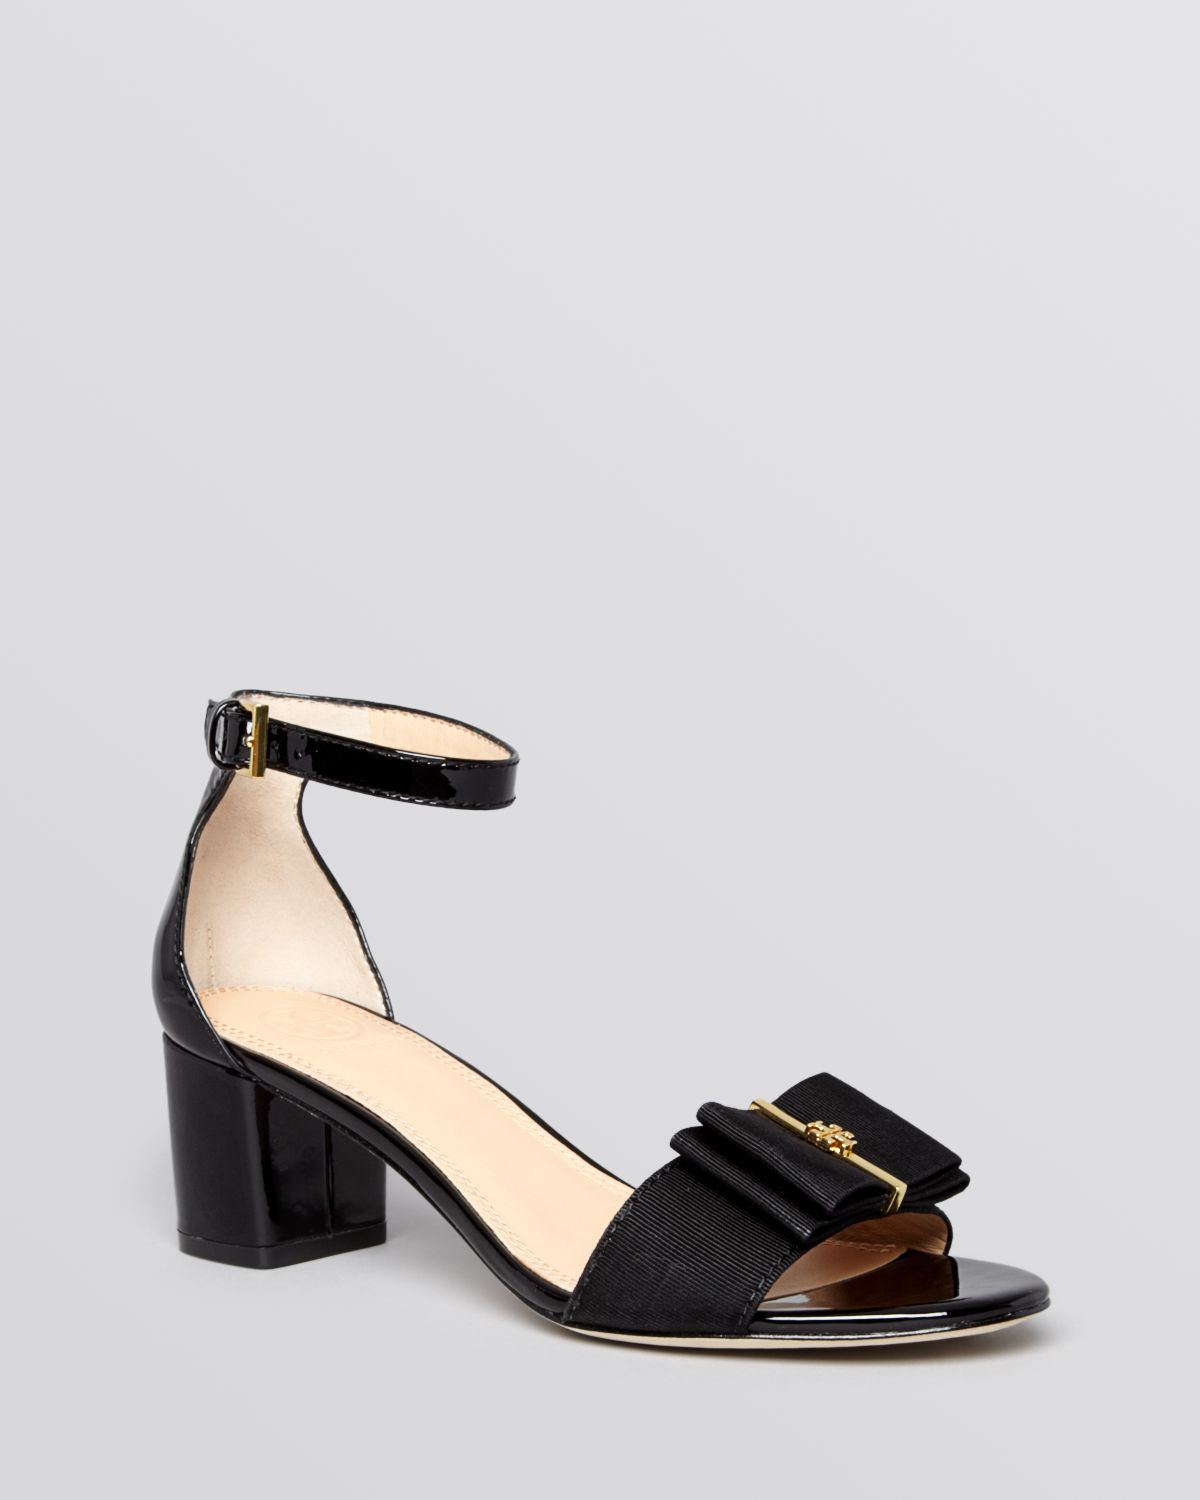 tory burch ankle strap heels